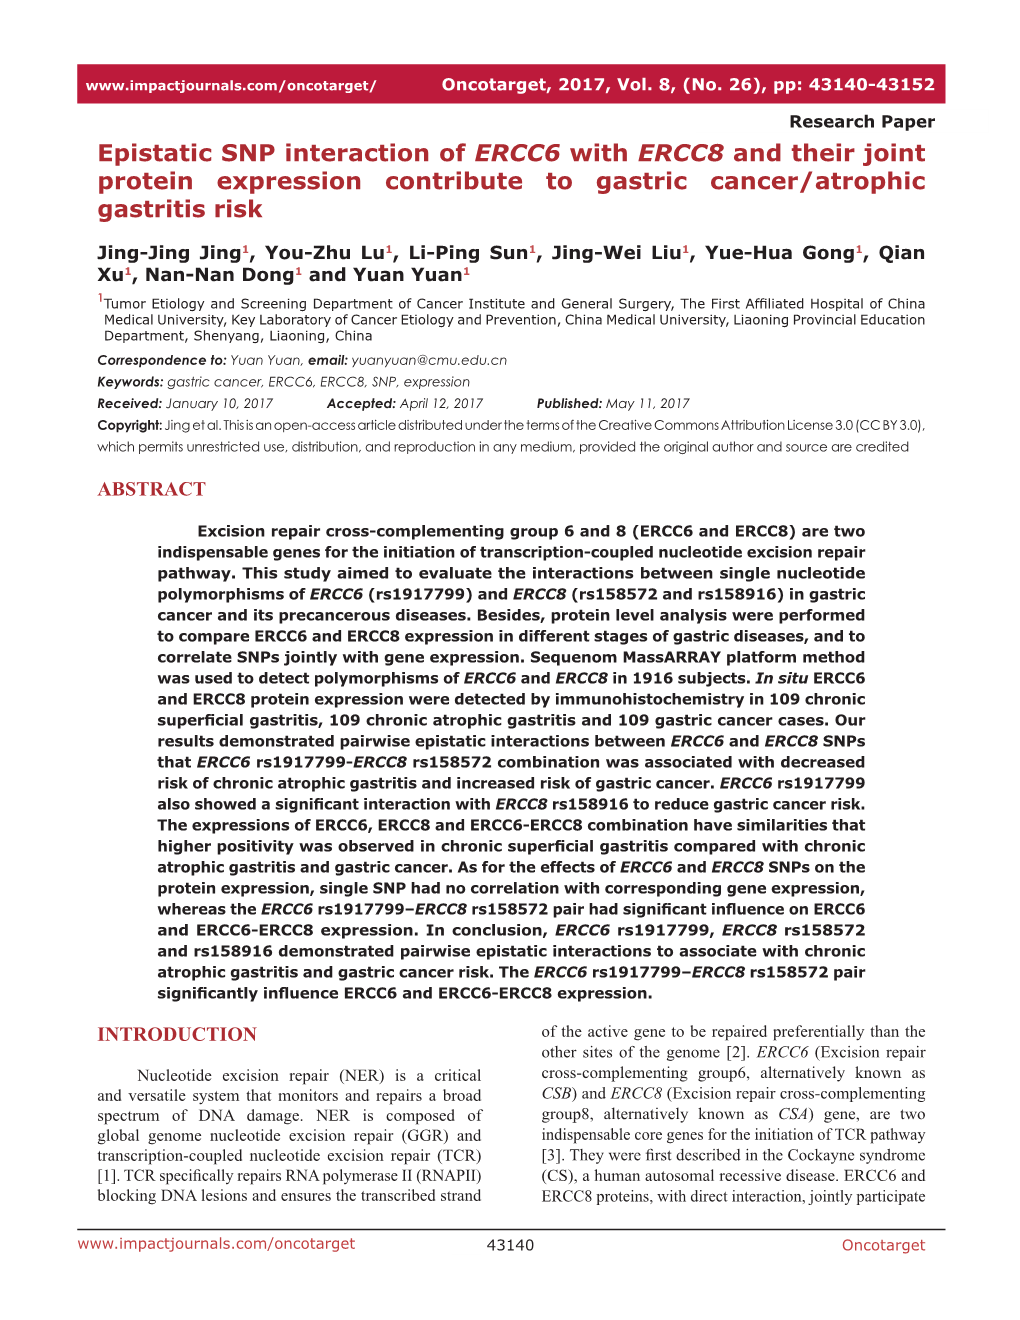 Epistatic SNP Interaction of ERCC6 with ERCC8 and Their Joint Protein Expression Contribute to Gastric Cancer/Atrophic Gastritis Risk